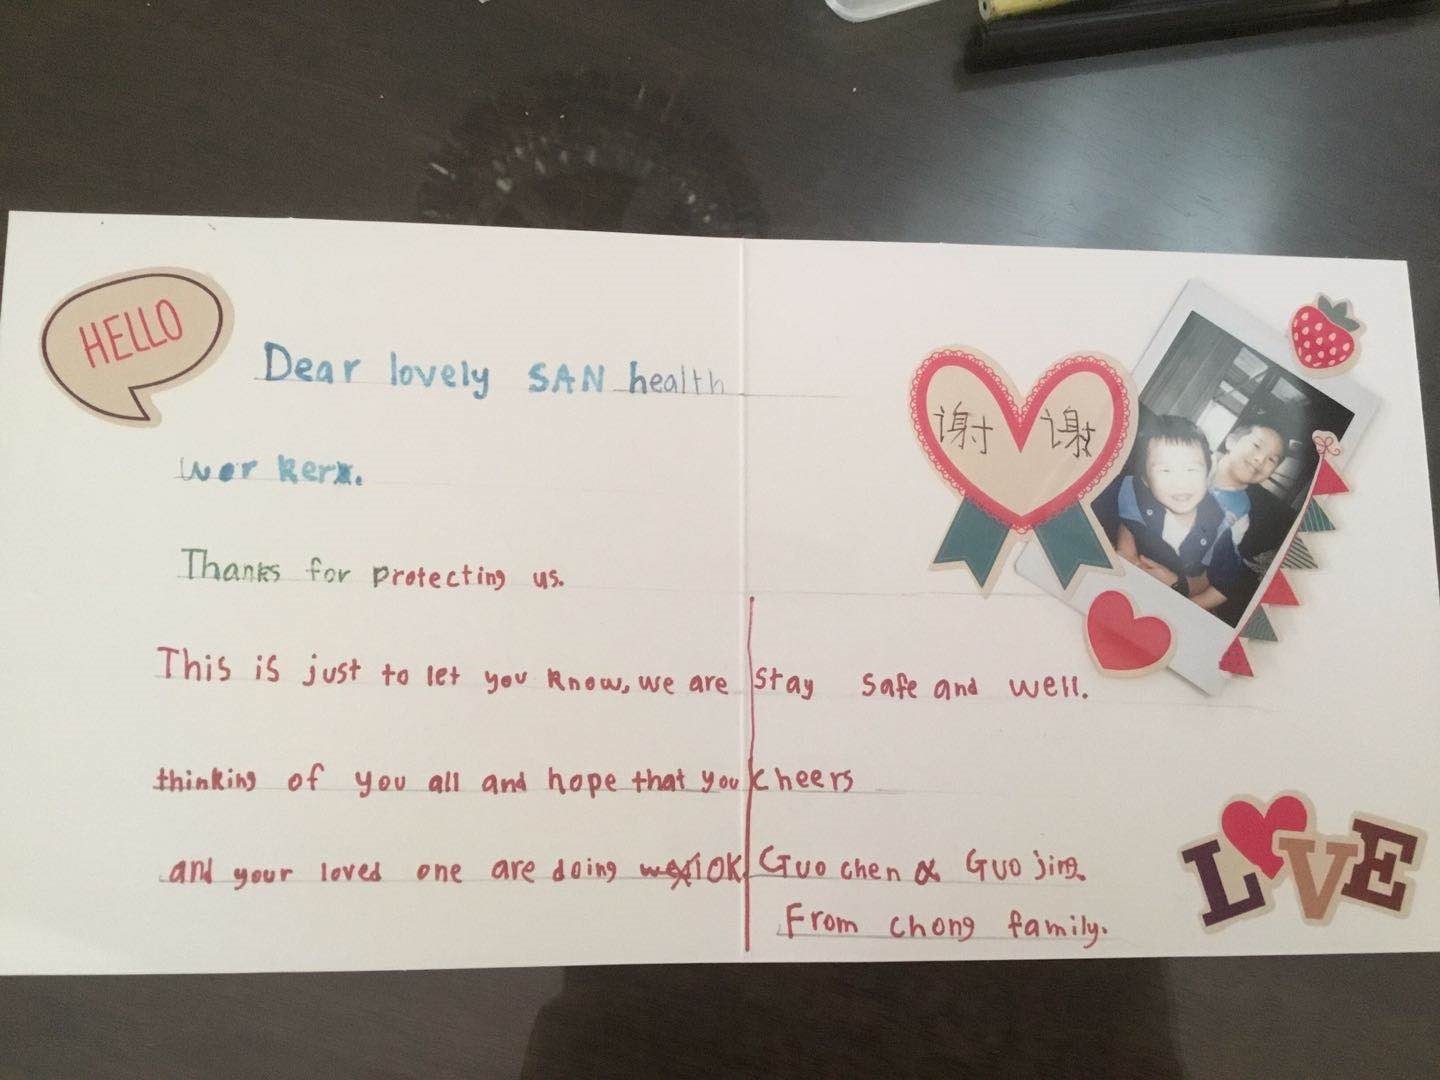 The card sent with masks by a Chinese Australian family